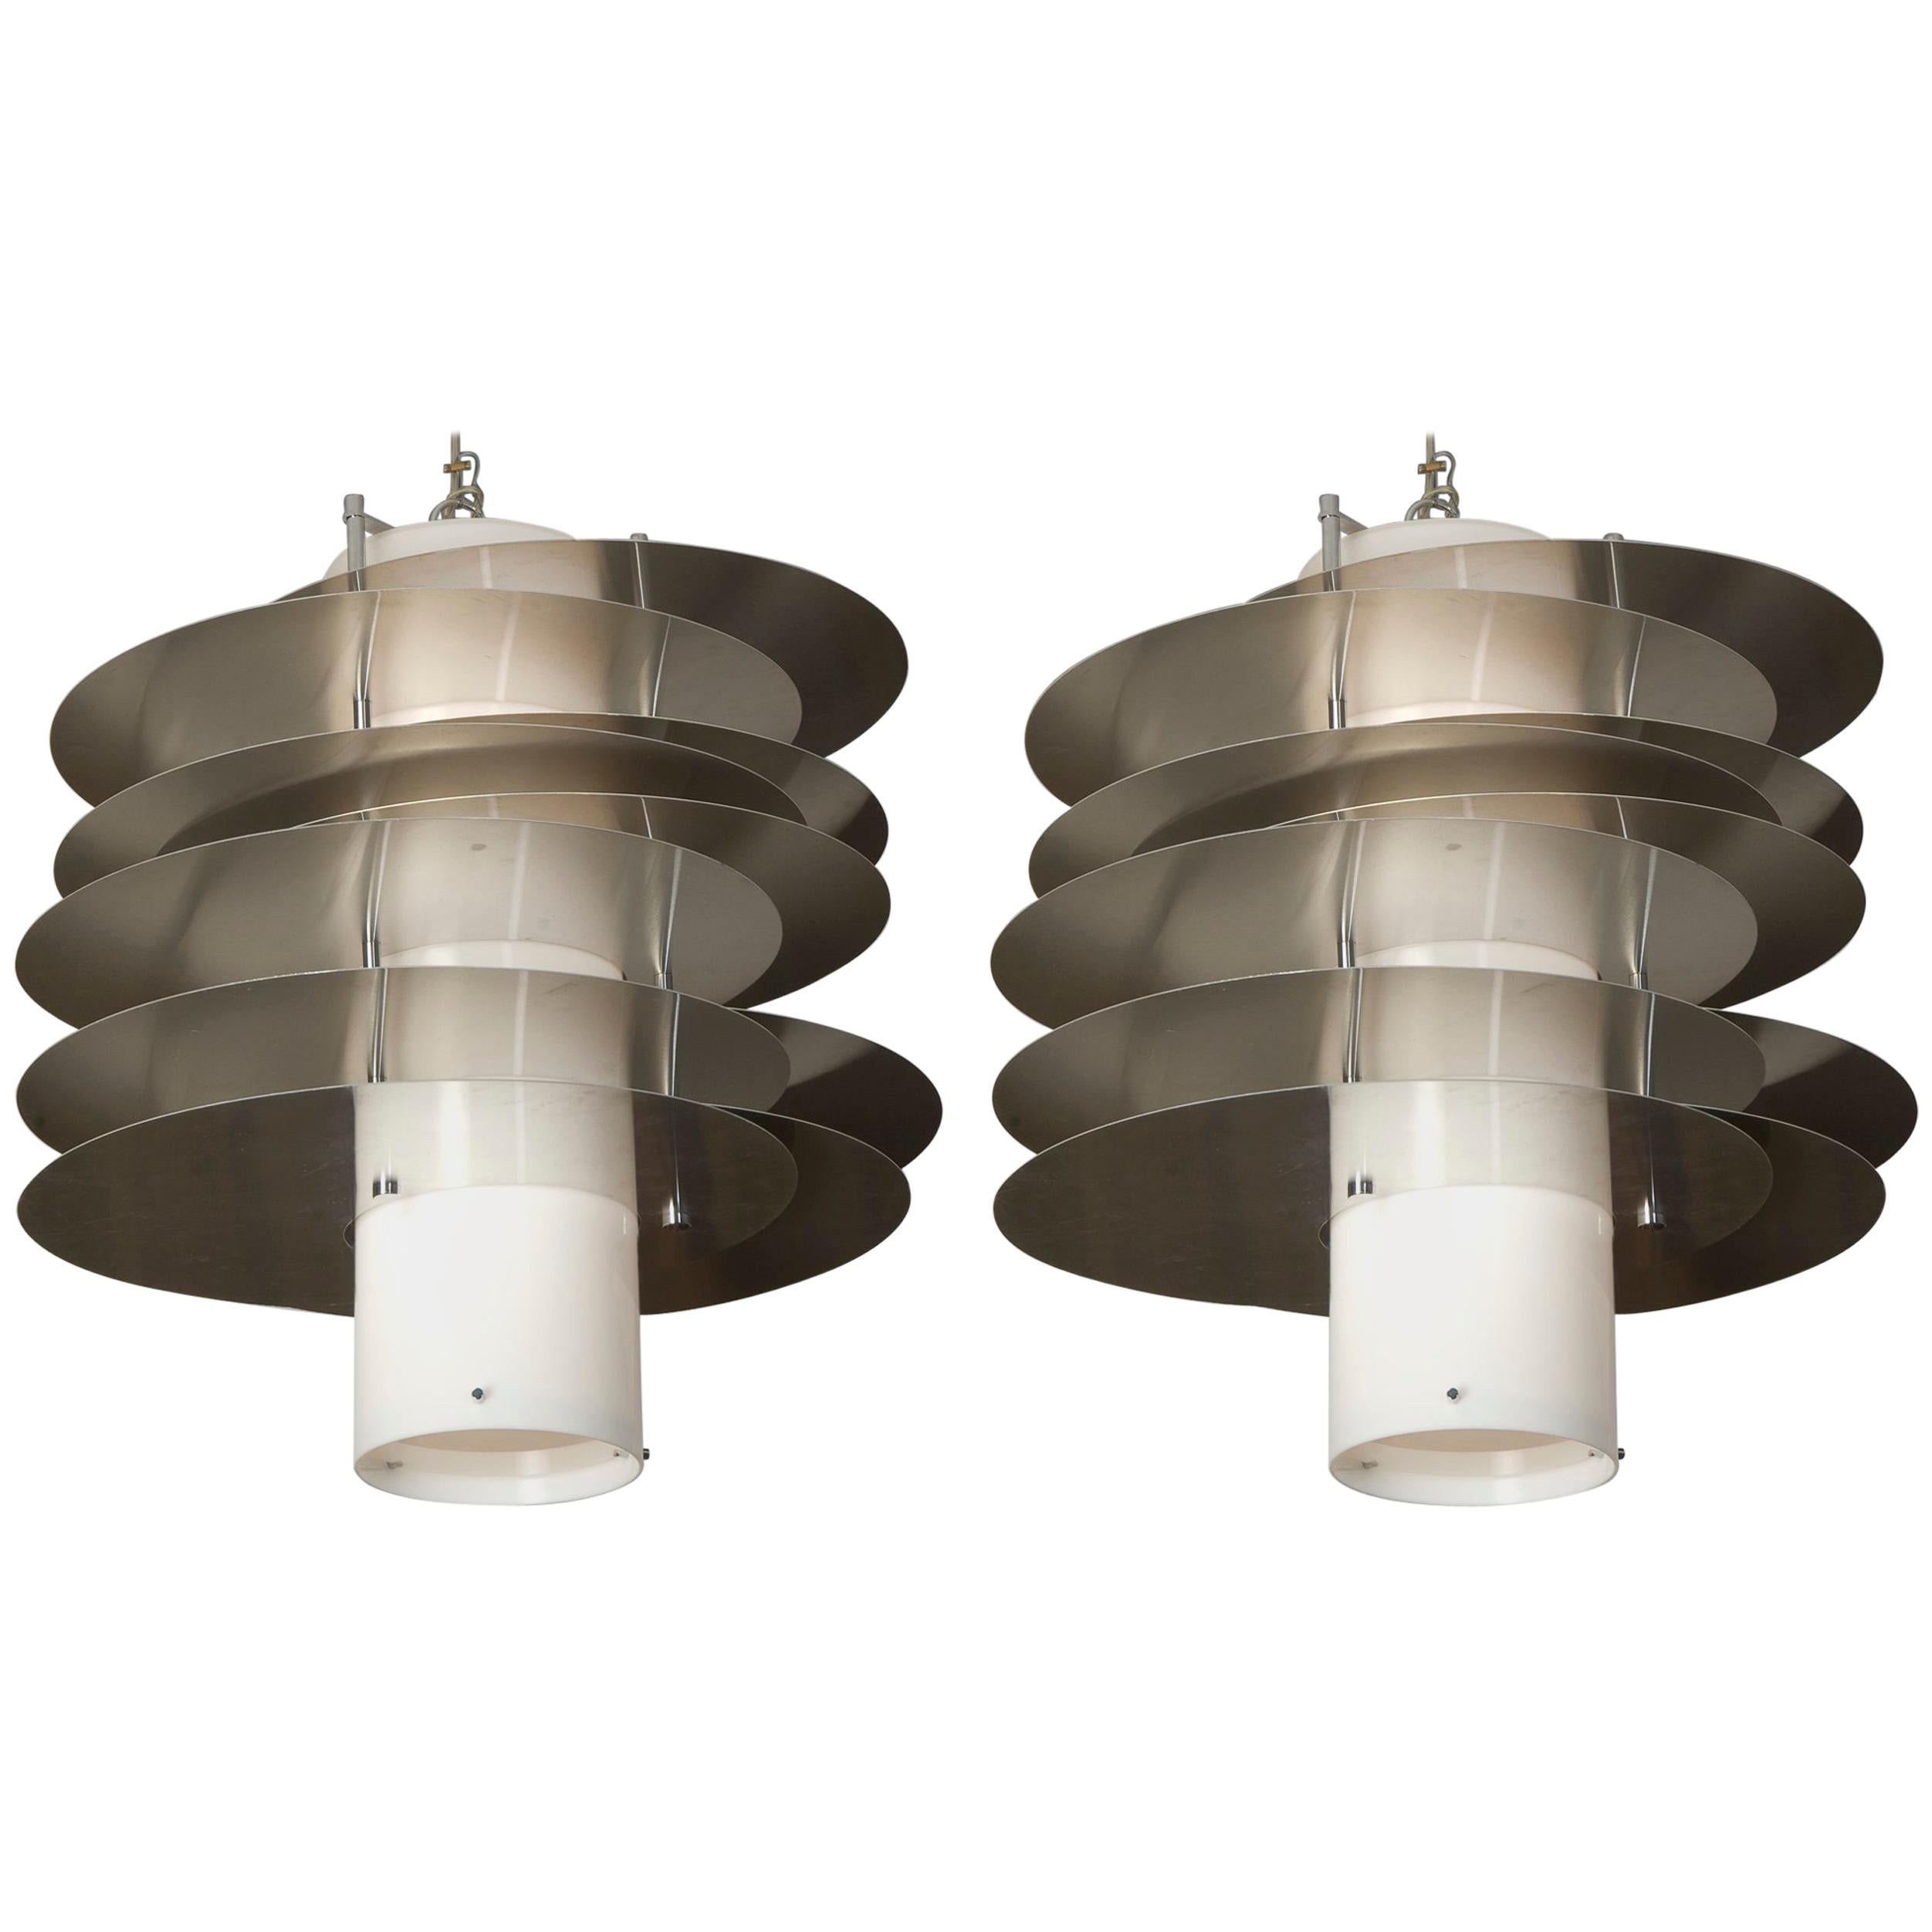 Pair of Italians Ceiling Lamps, Steel and Methacrylate, 1970 For Sale